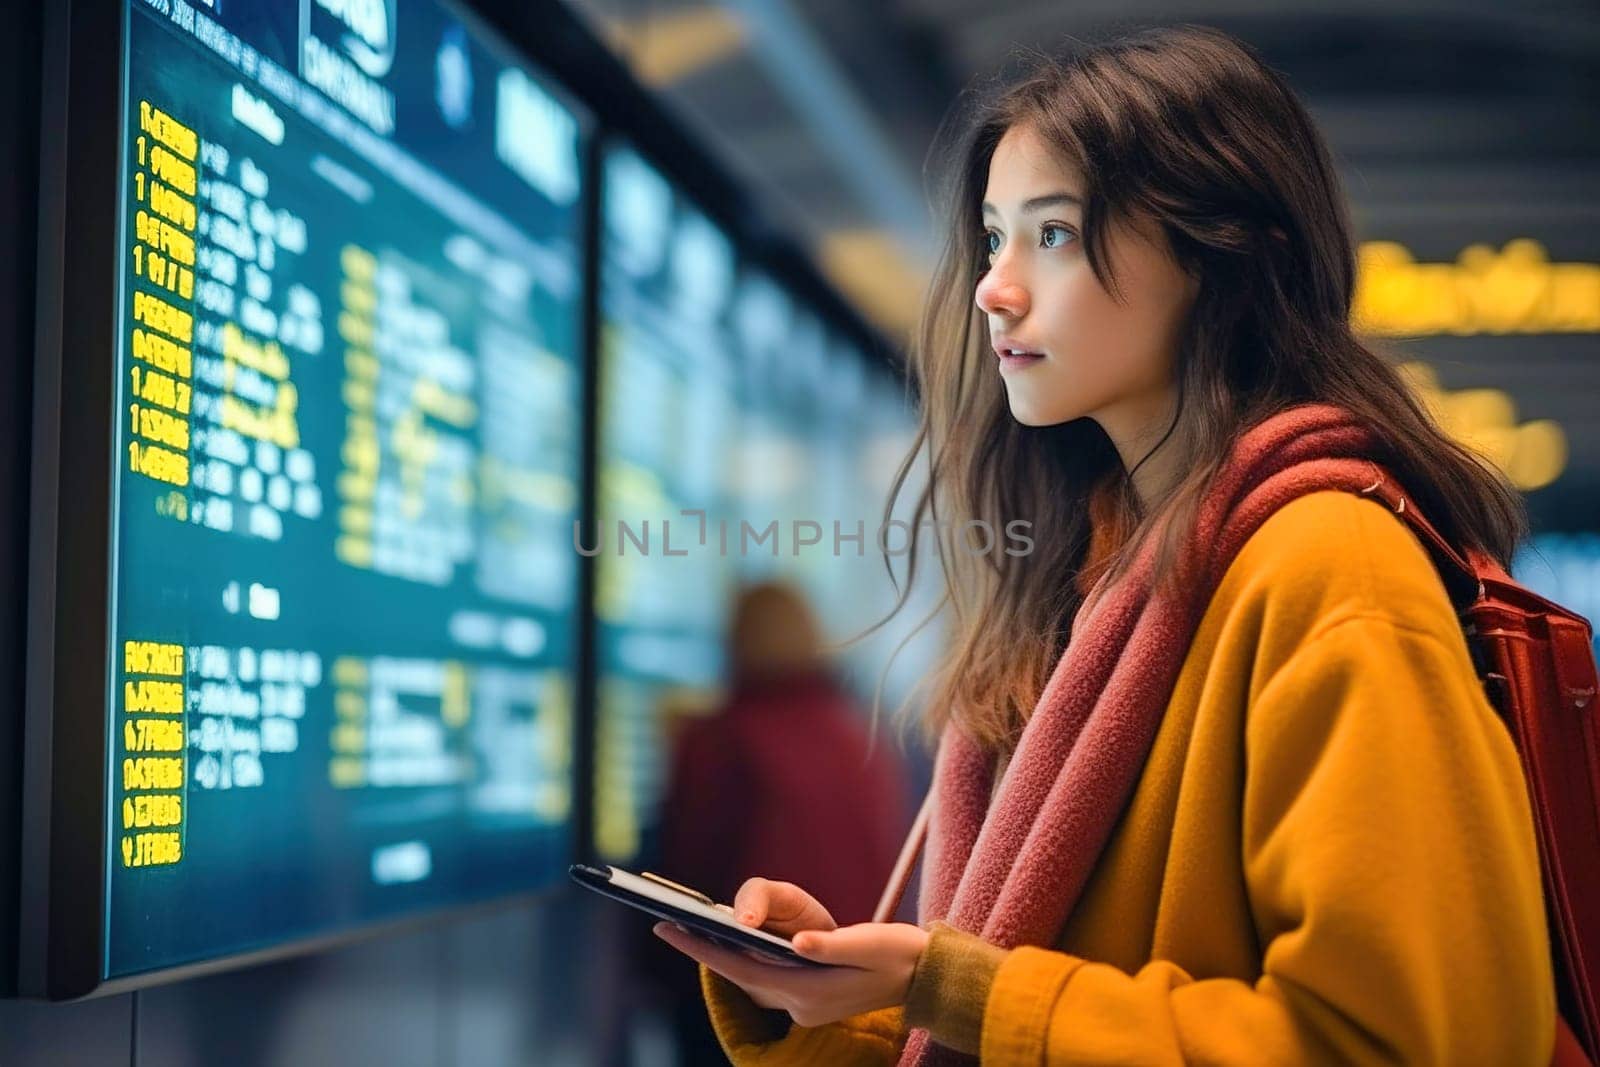 A woman with luggage looks at the airplane schedule board at the airport